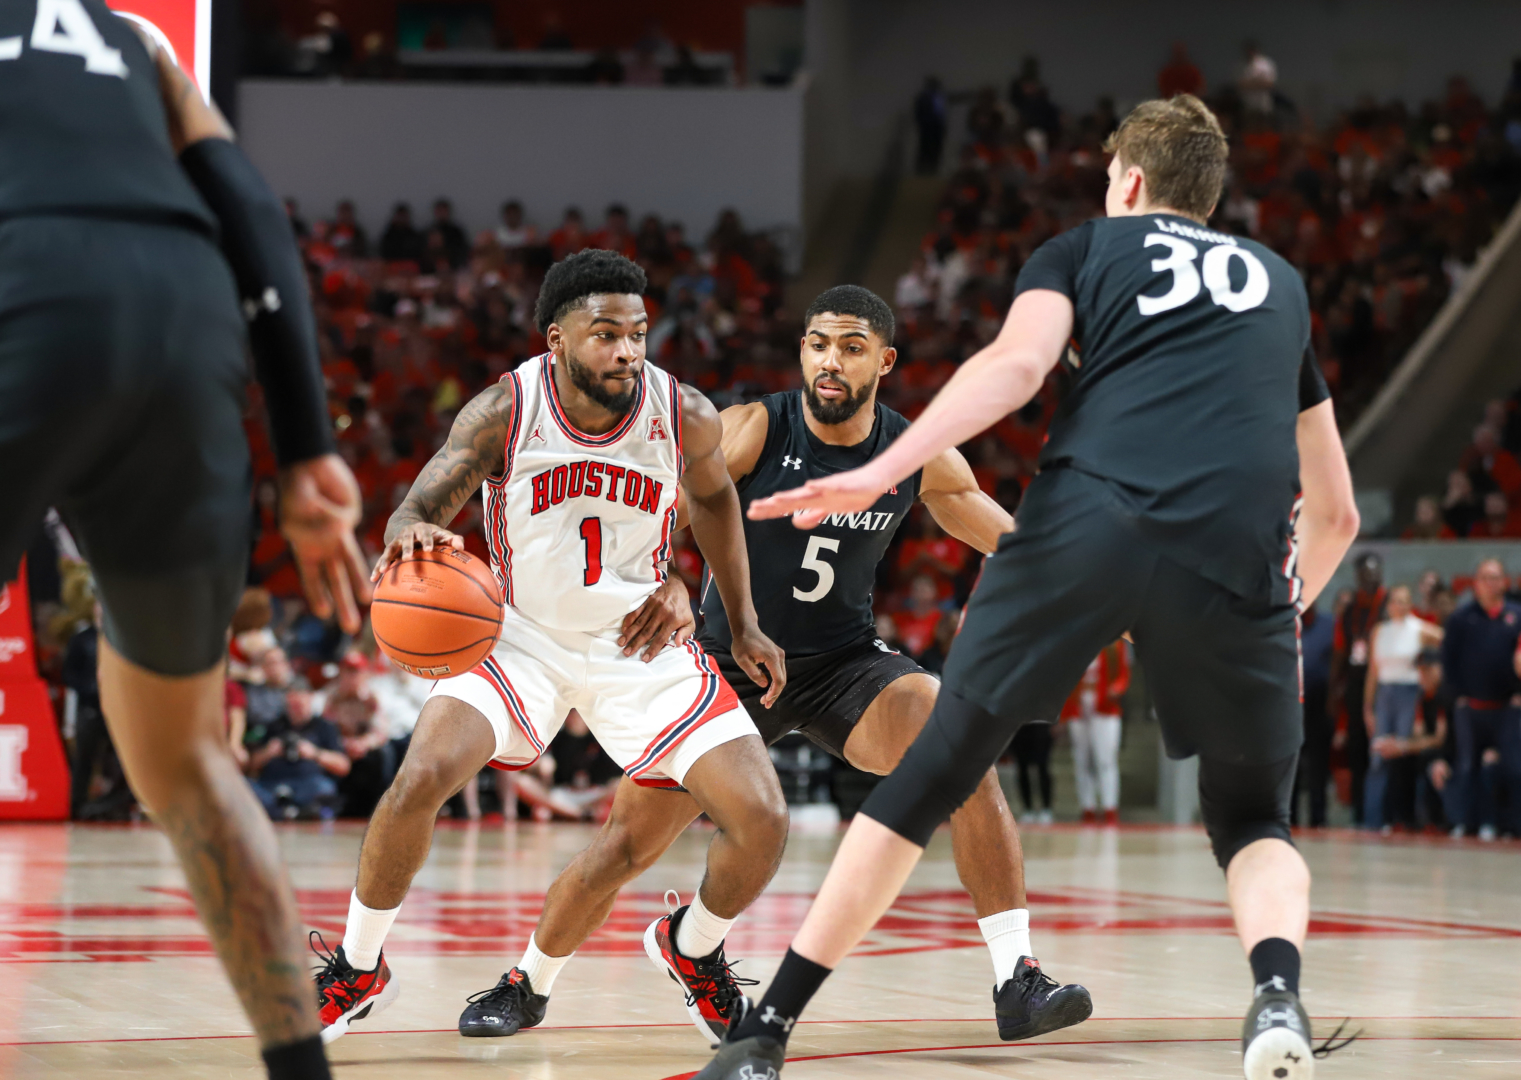 UH point guard Jamal Shead played an integral role in the Cougars' comeback victory over Cincinnati on Saturday. | Anh Le/The Cougar